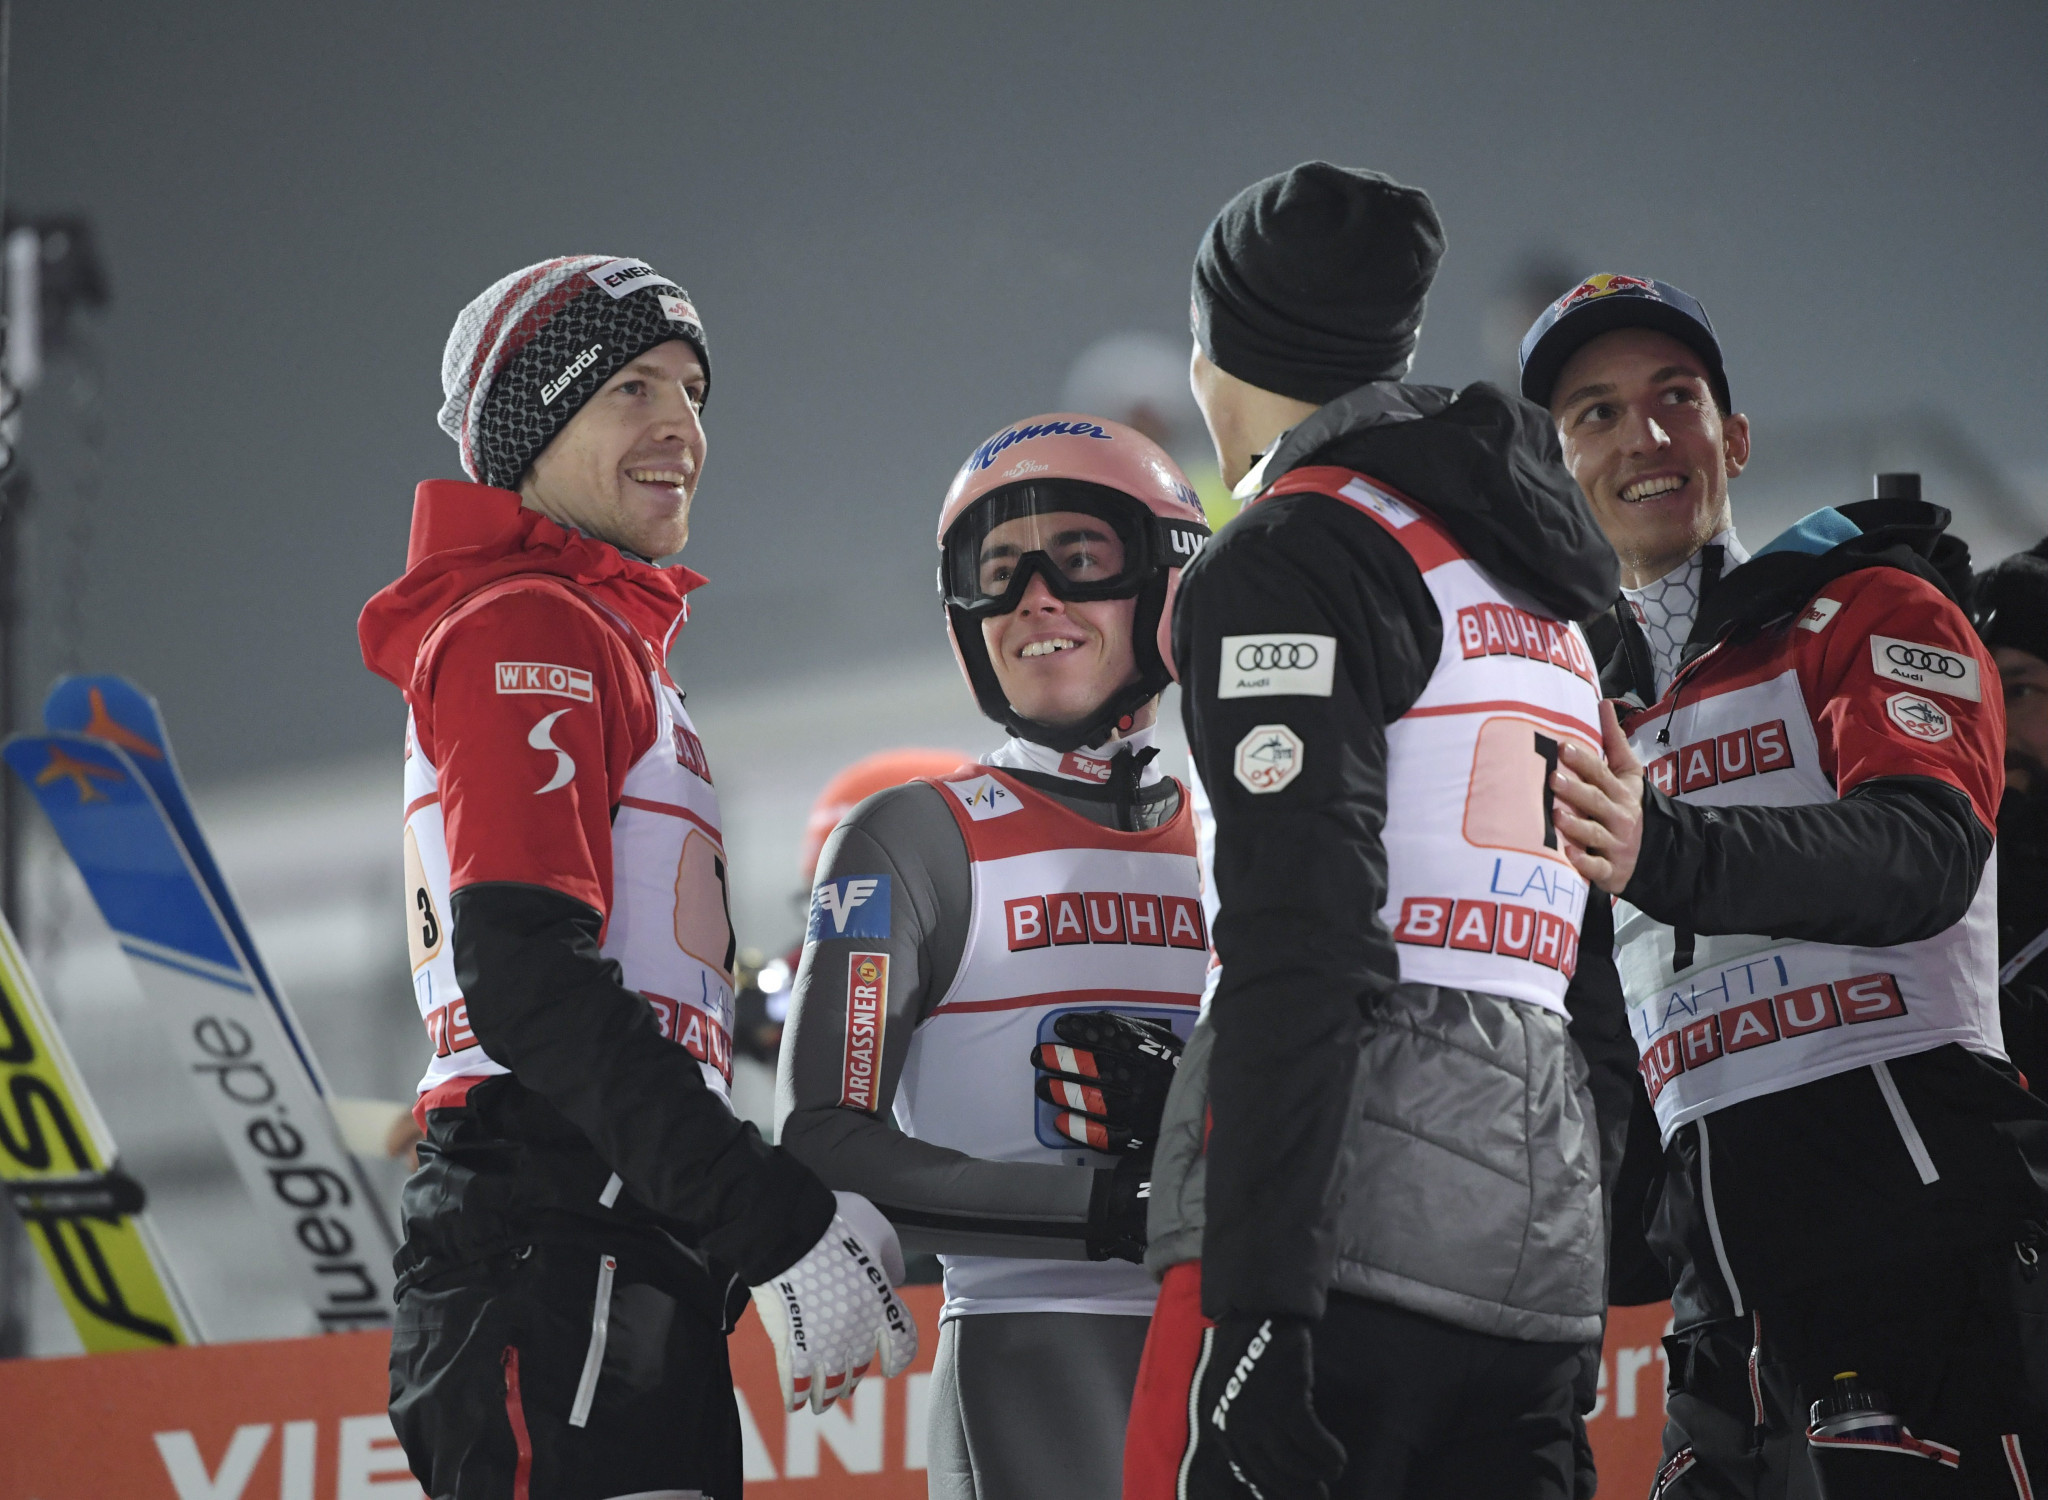 Austria celebrated victory in the men's team competition in Lahti ©Getty Images